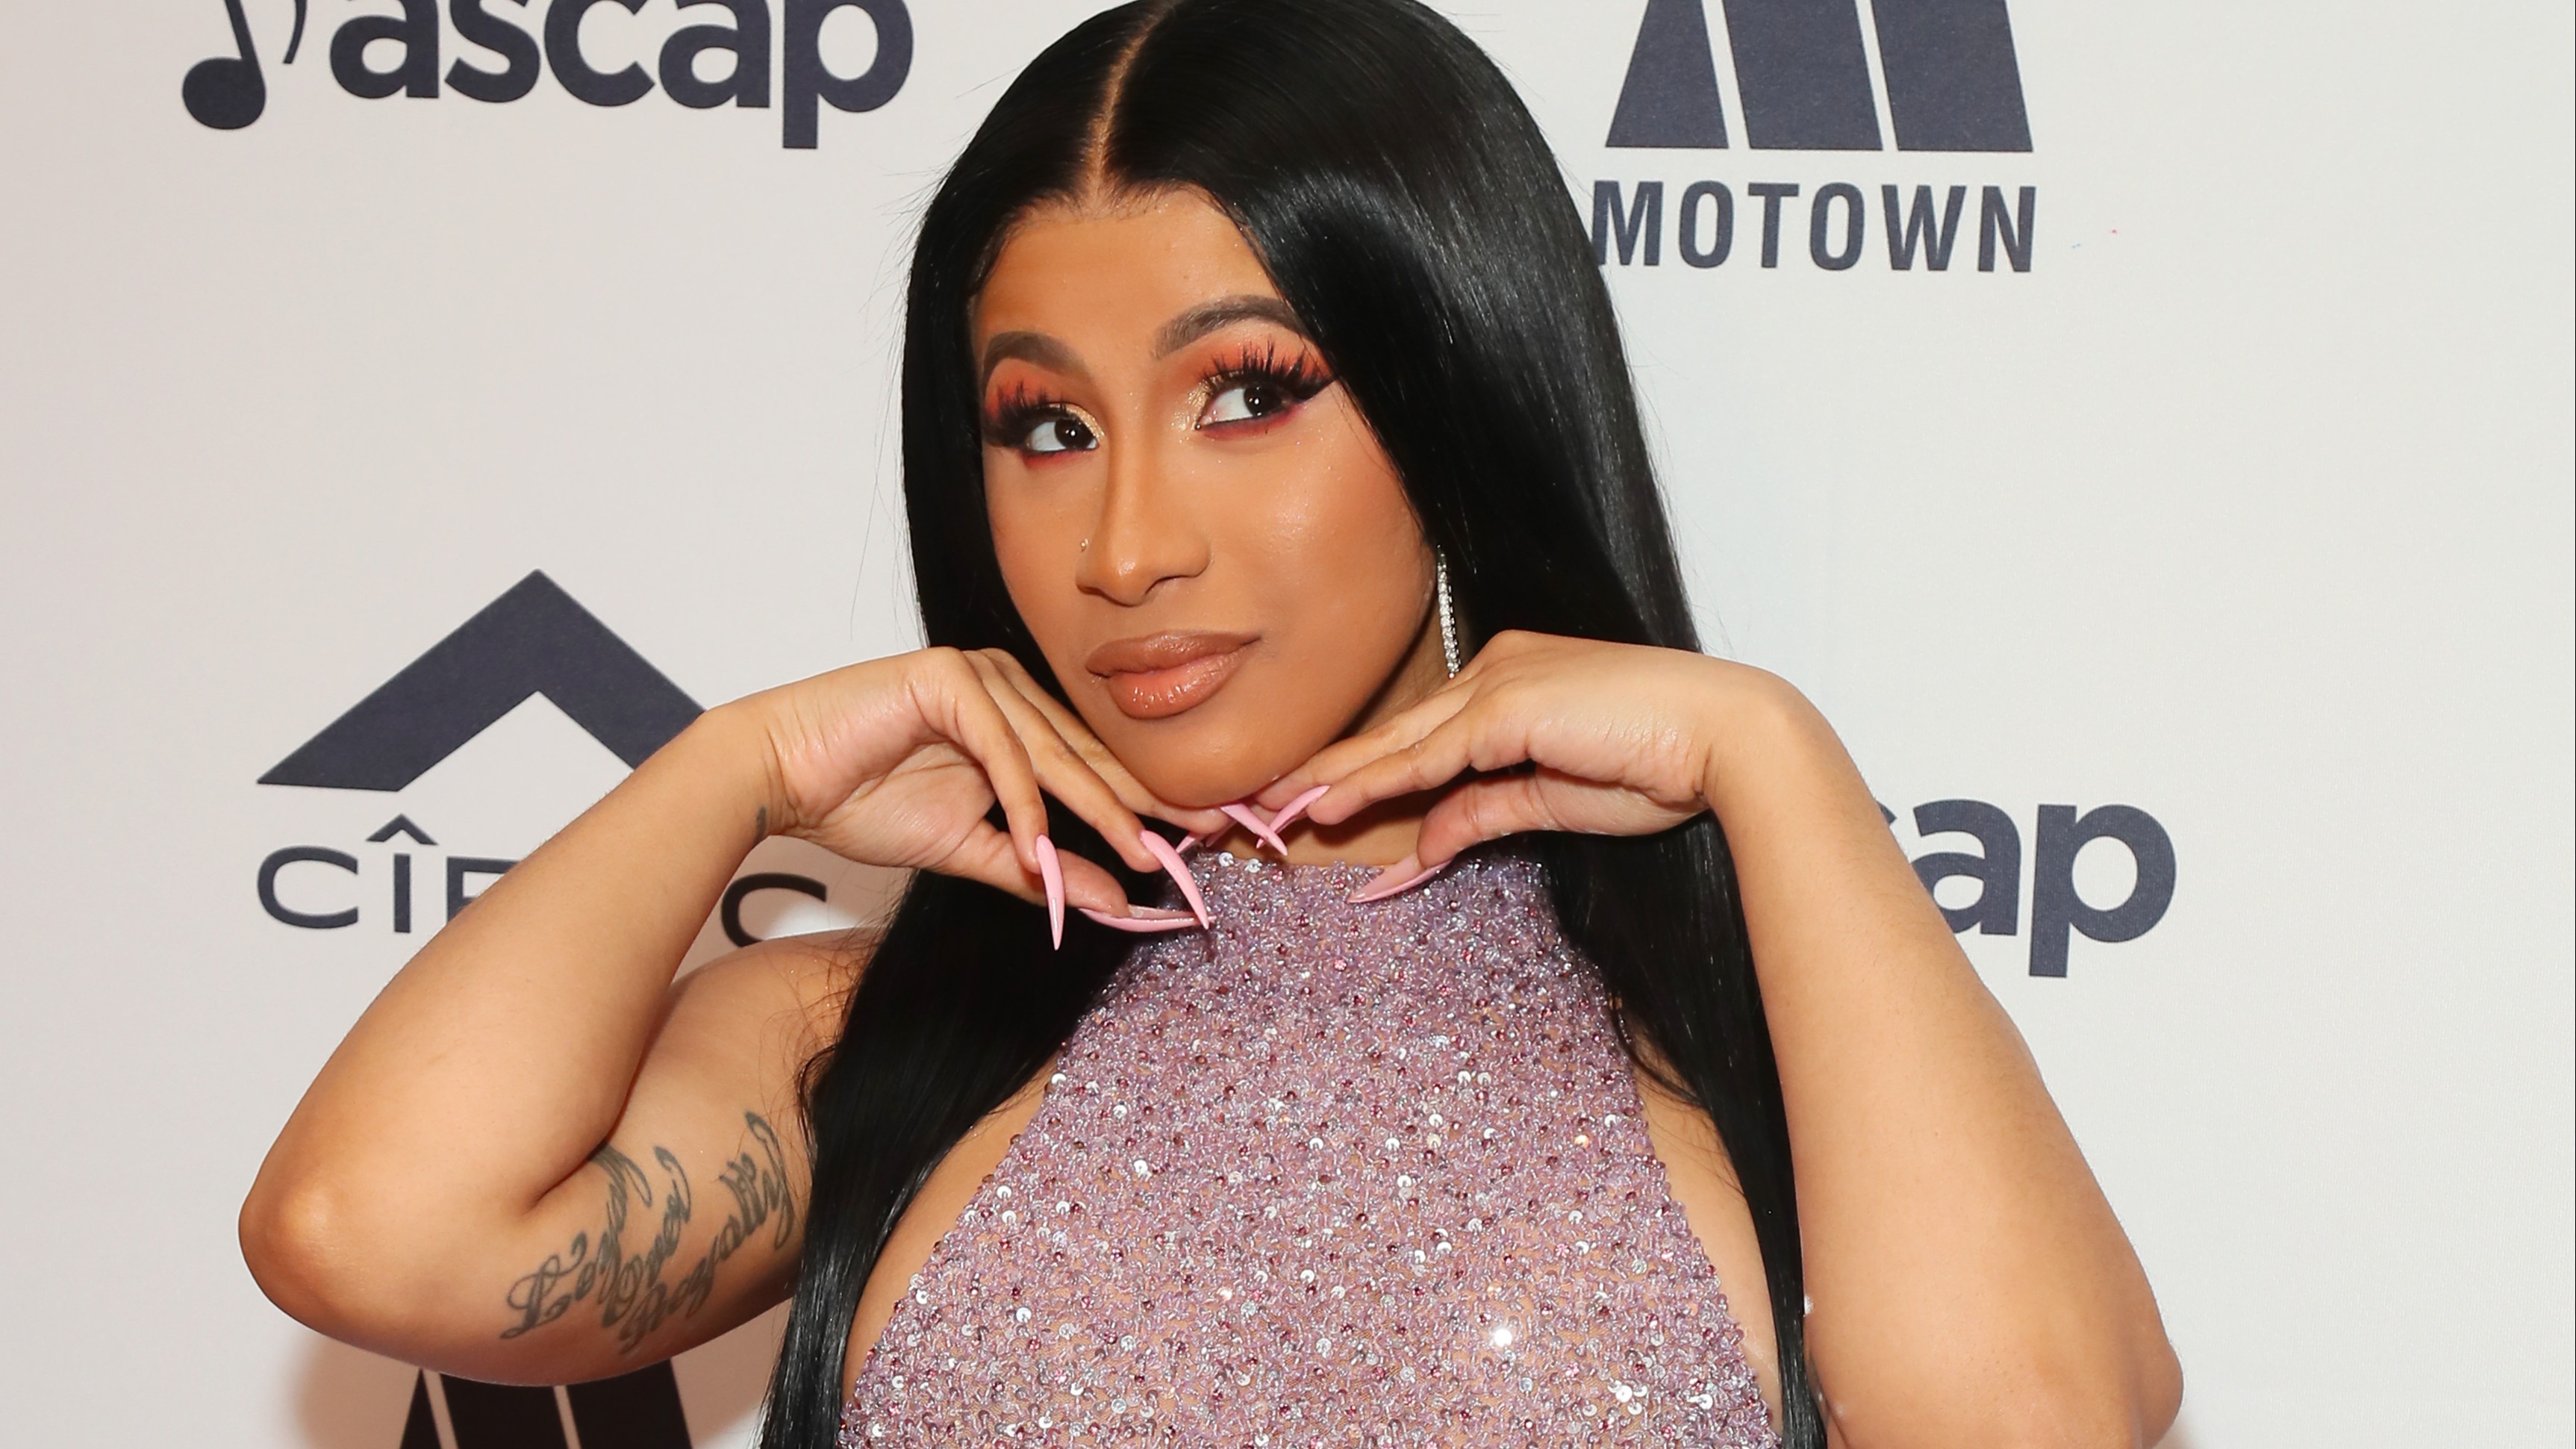 Cardi B Gives Fans a Close Look at Her New 'Wave' Face Tattoo in